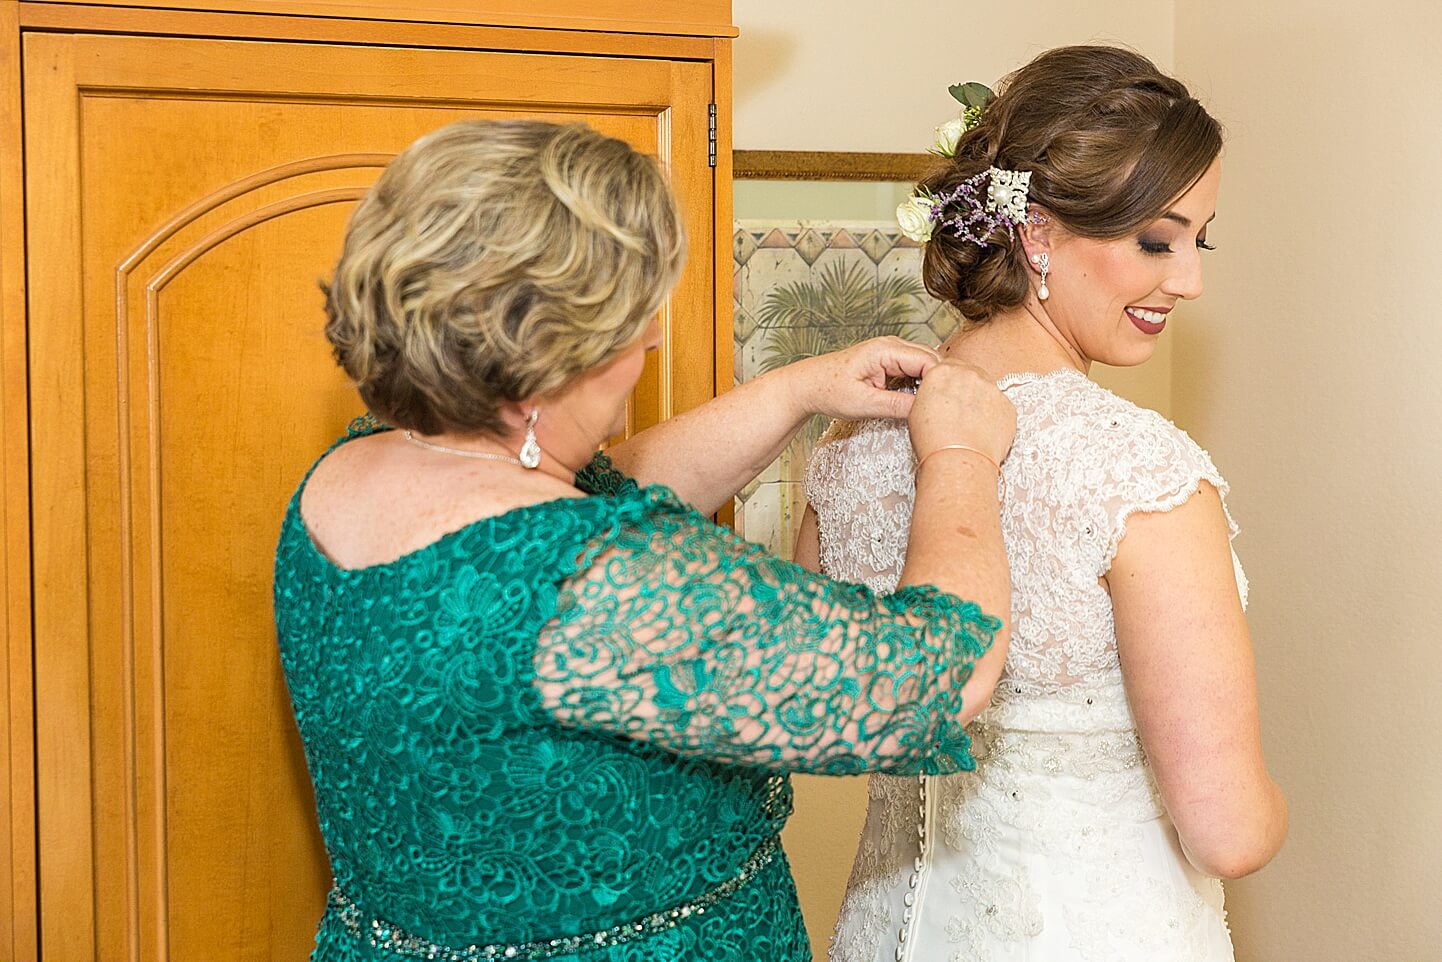 Photo of mother buttoning up the bride in her wedding dress at the Hilton Boca Raton Hotel | Photo by Boca Wedding Photographer